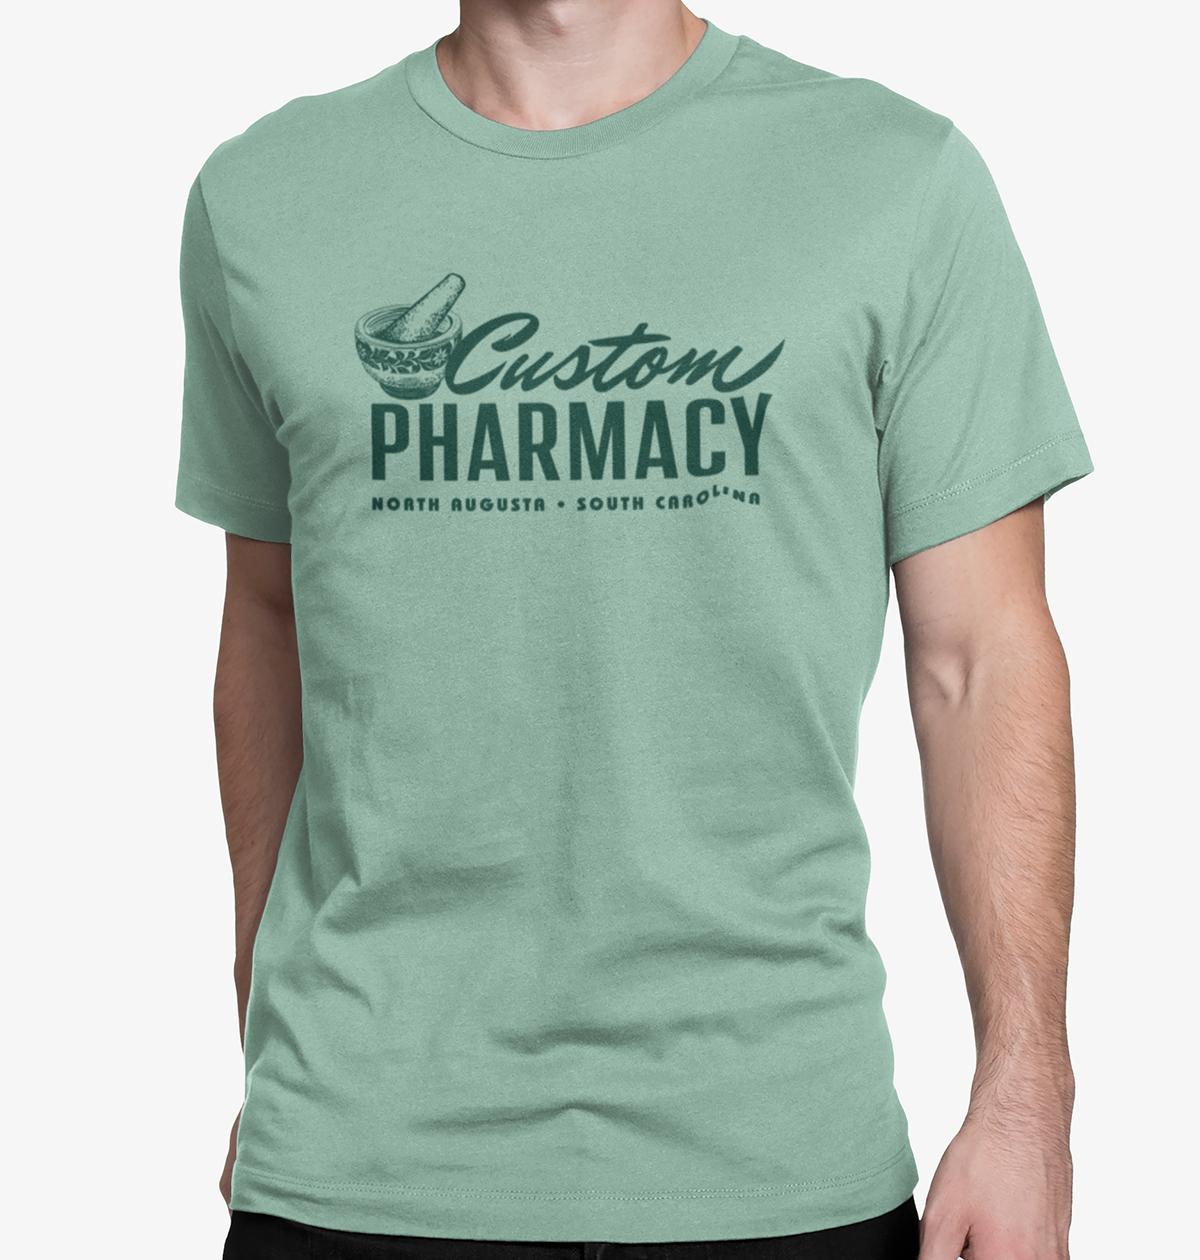 Custom Pharmacy of North Augusta - We Give a Shirt